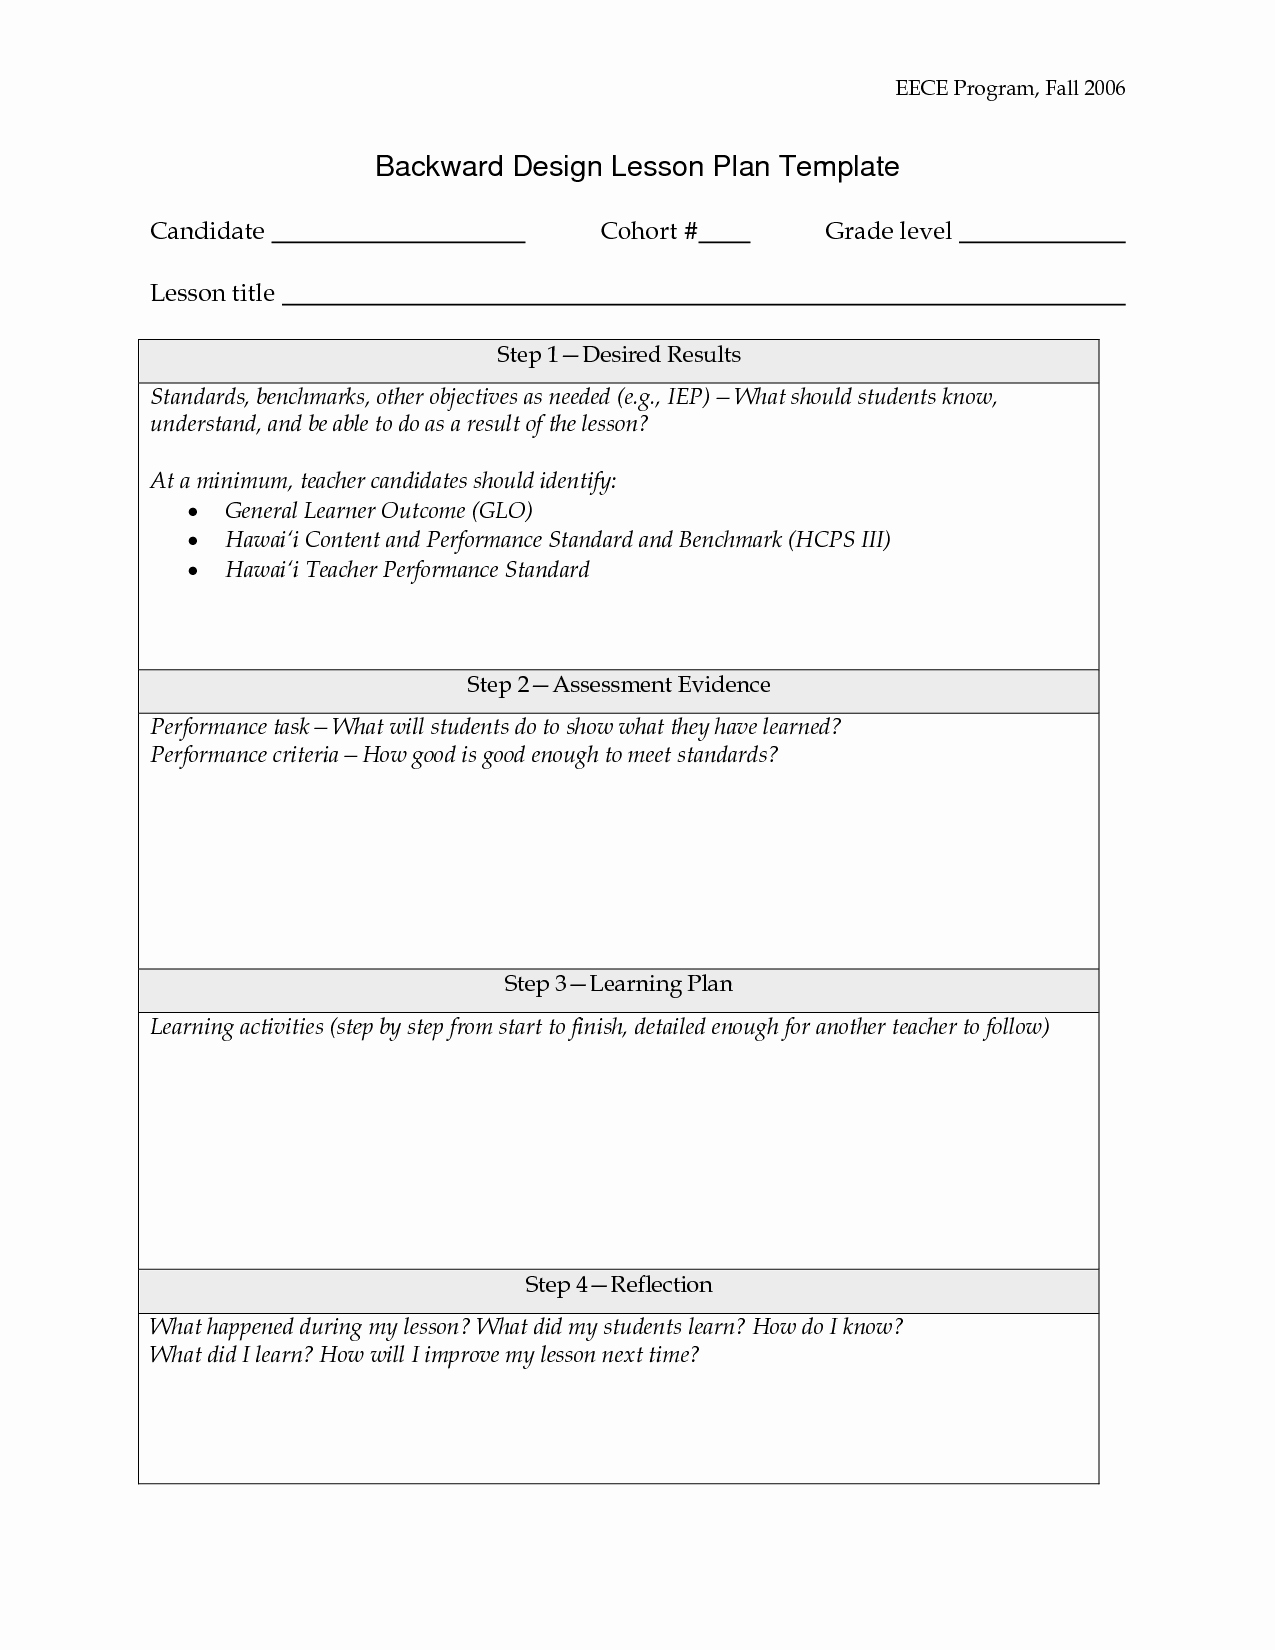 Asca Lesson Plan Template Lovely Backward Planning Template